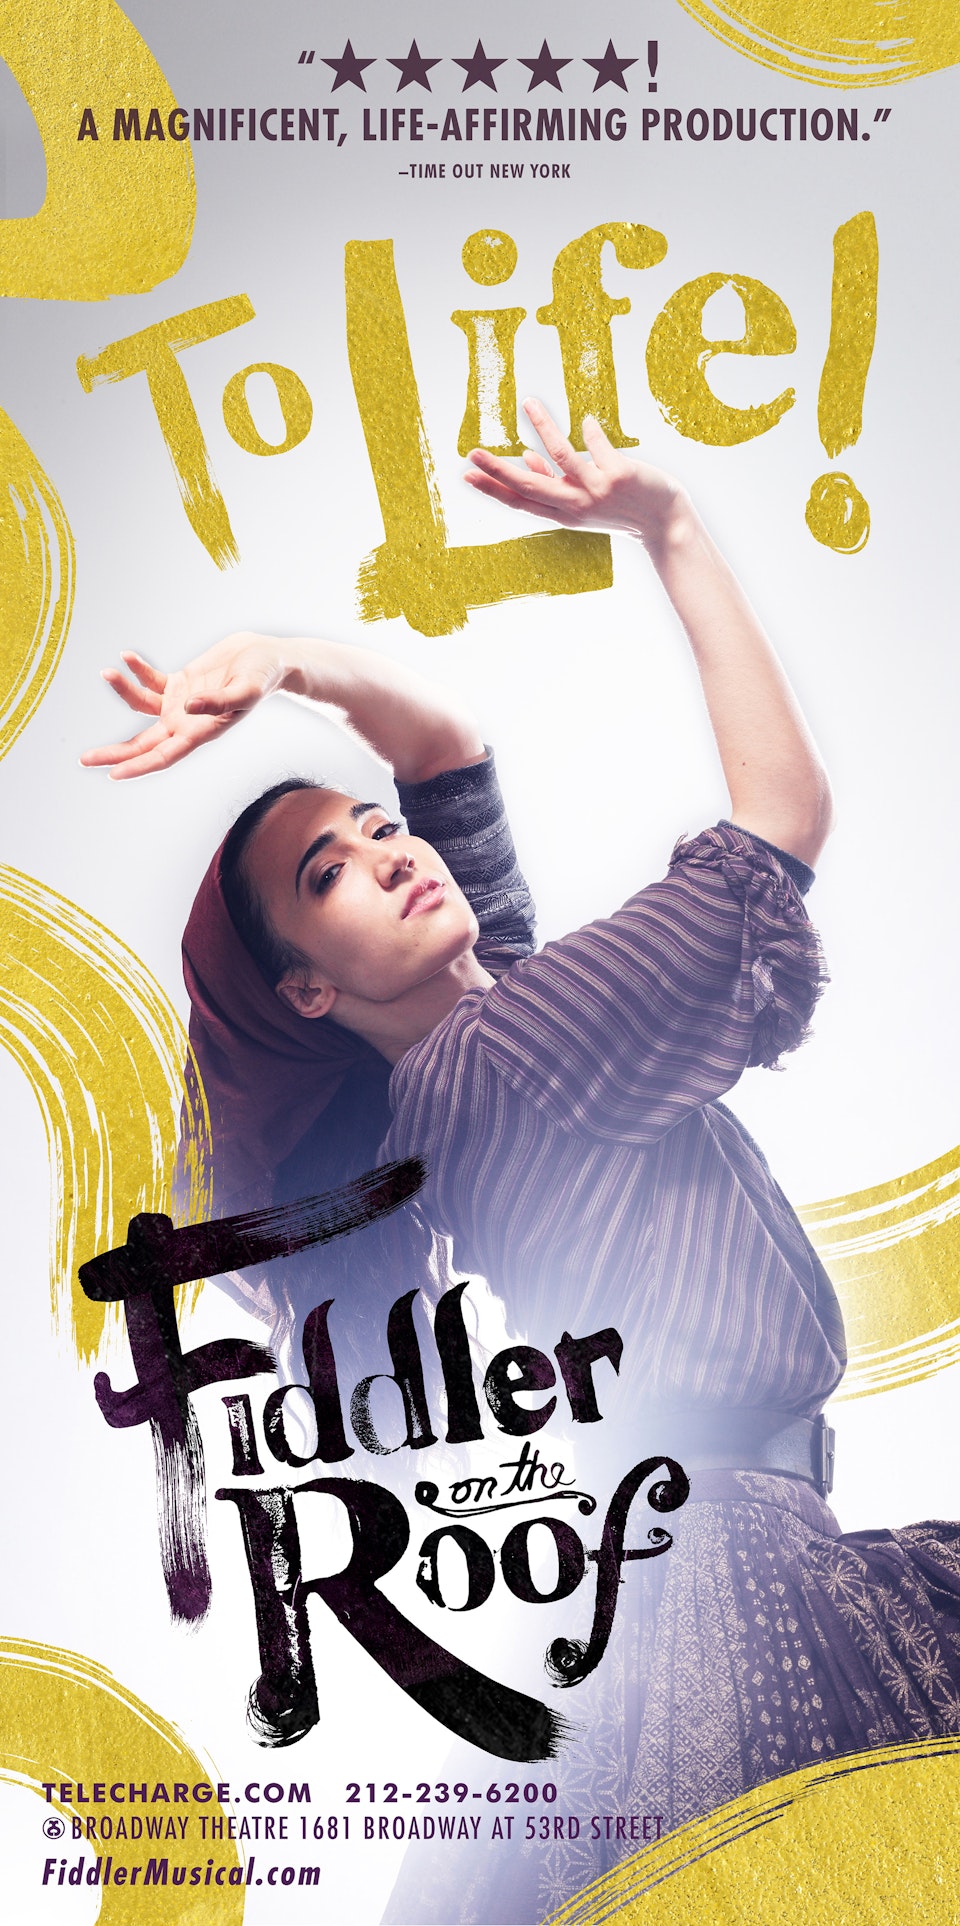 FIDDLER ON THE ROOF - KEY ART CAMPAIGN